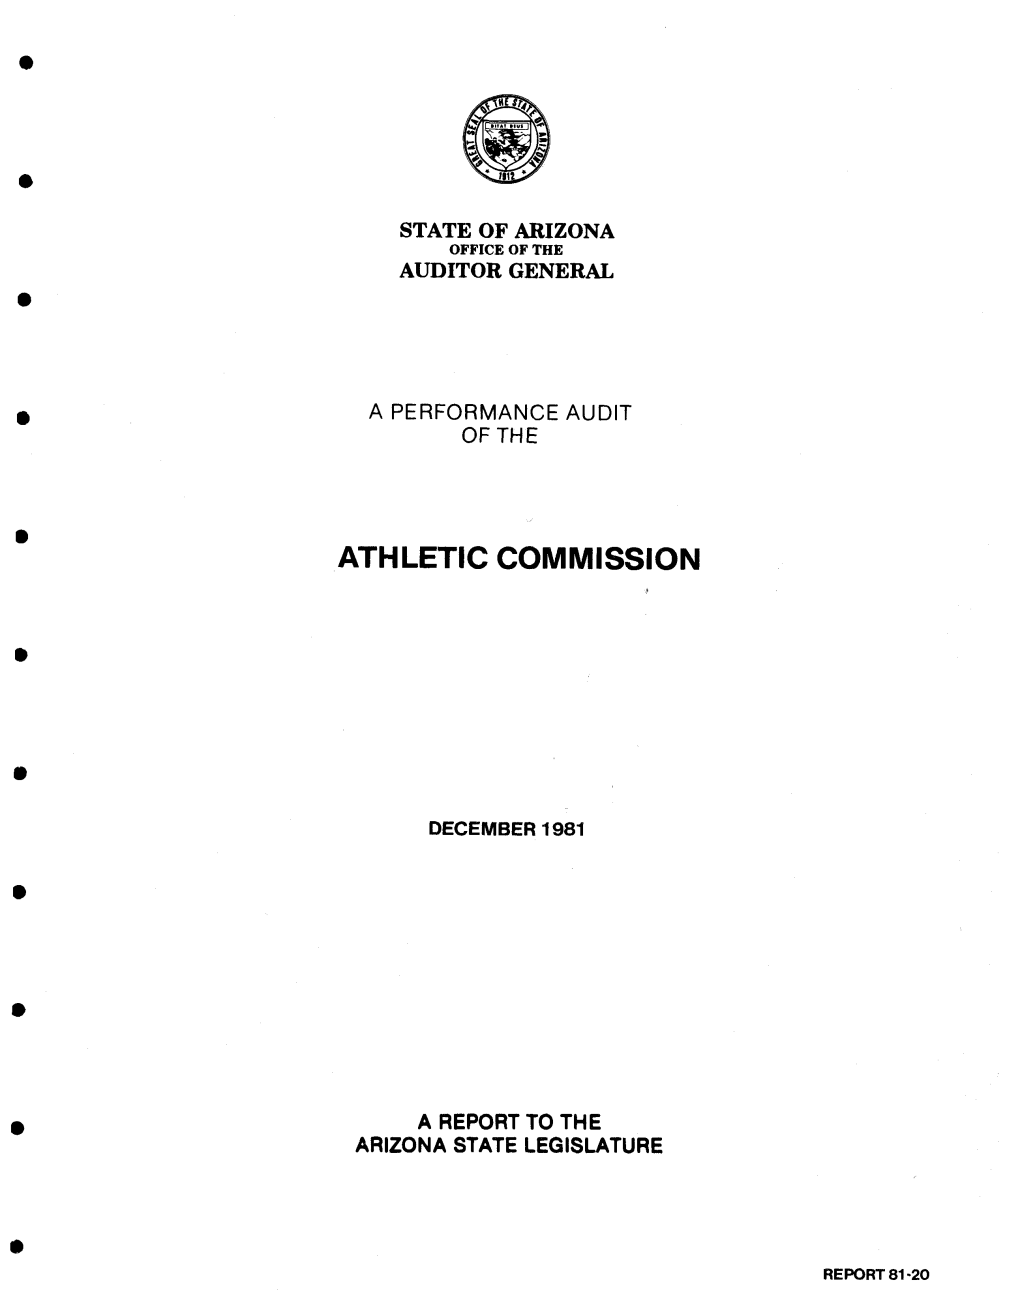 Athletic Commission